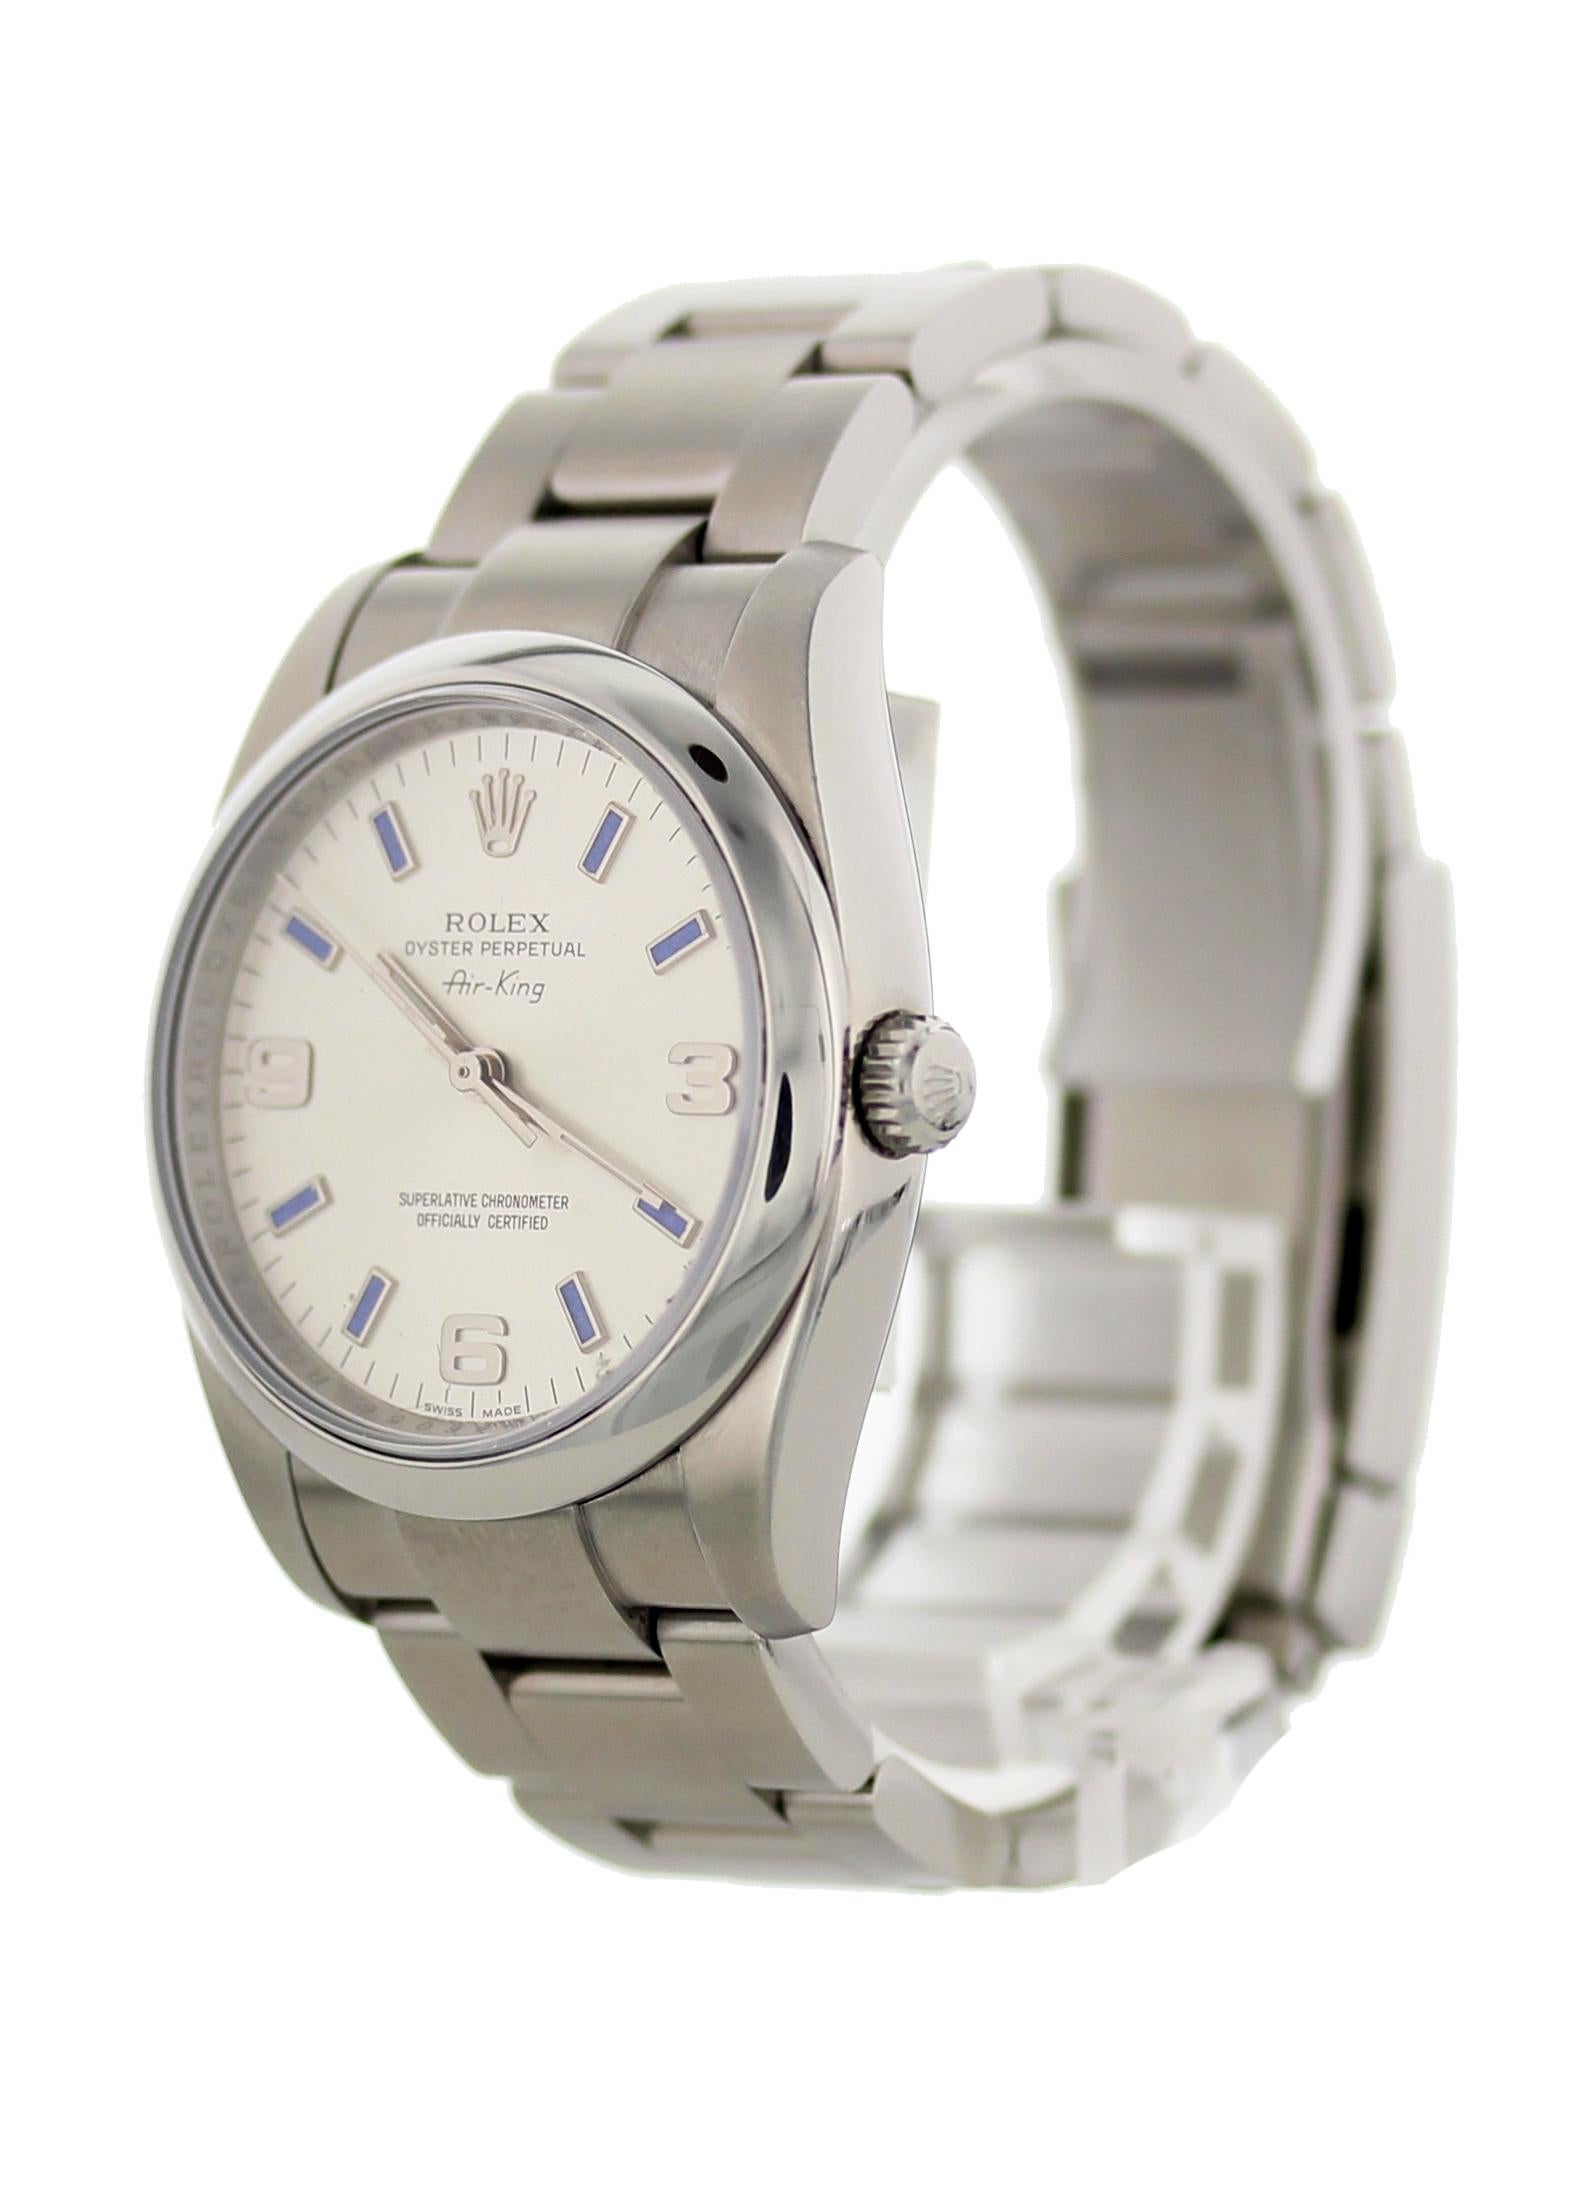 Rolex Oyster Perpetual Air King Precision 114200.  Stainless steel 34 mm case. Smooth stainless steel bezel. Blue dial with white hours markers and silver luminous hands. Stainless steel oyster band with a fold over clasp that will fit up to a 6.5